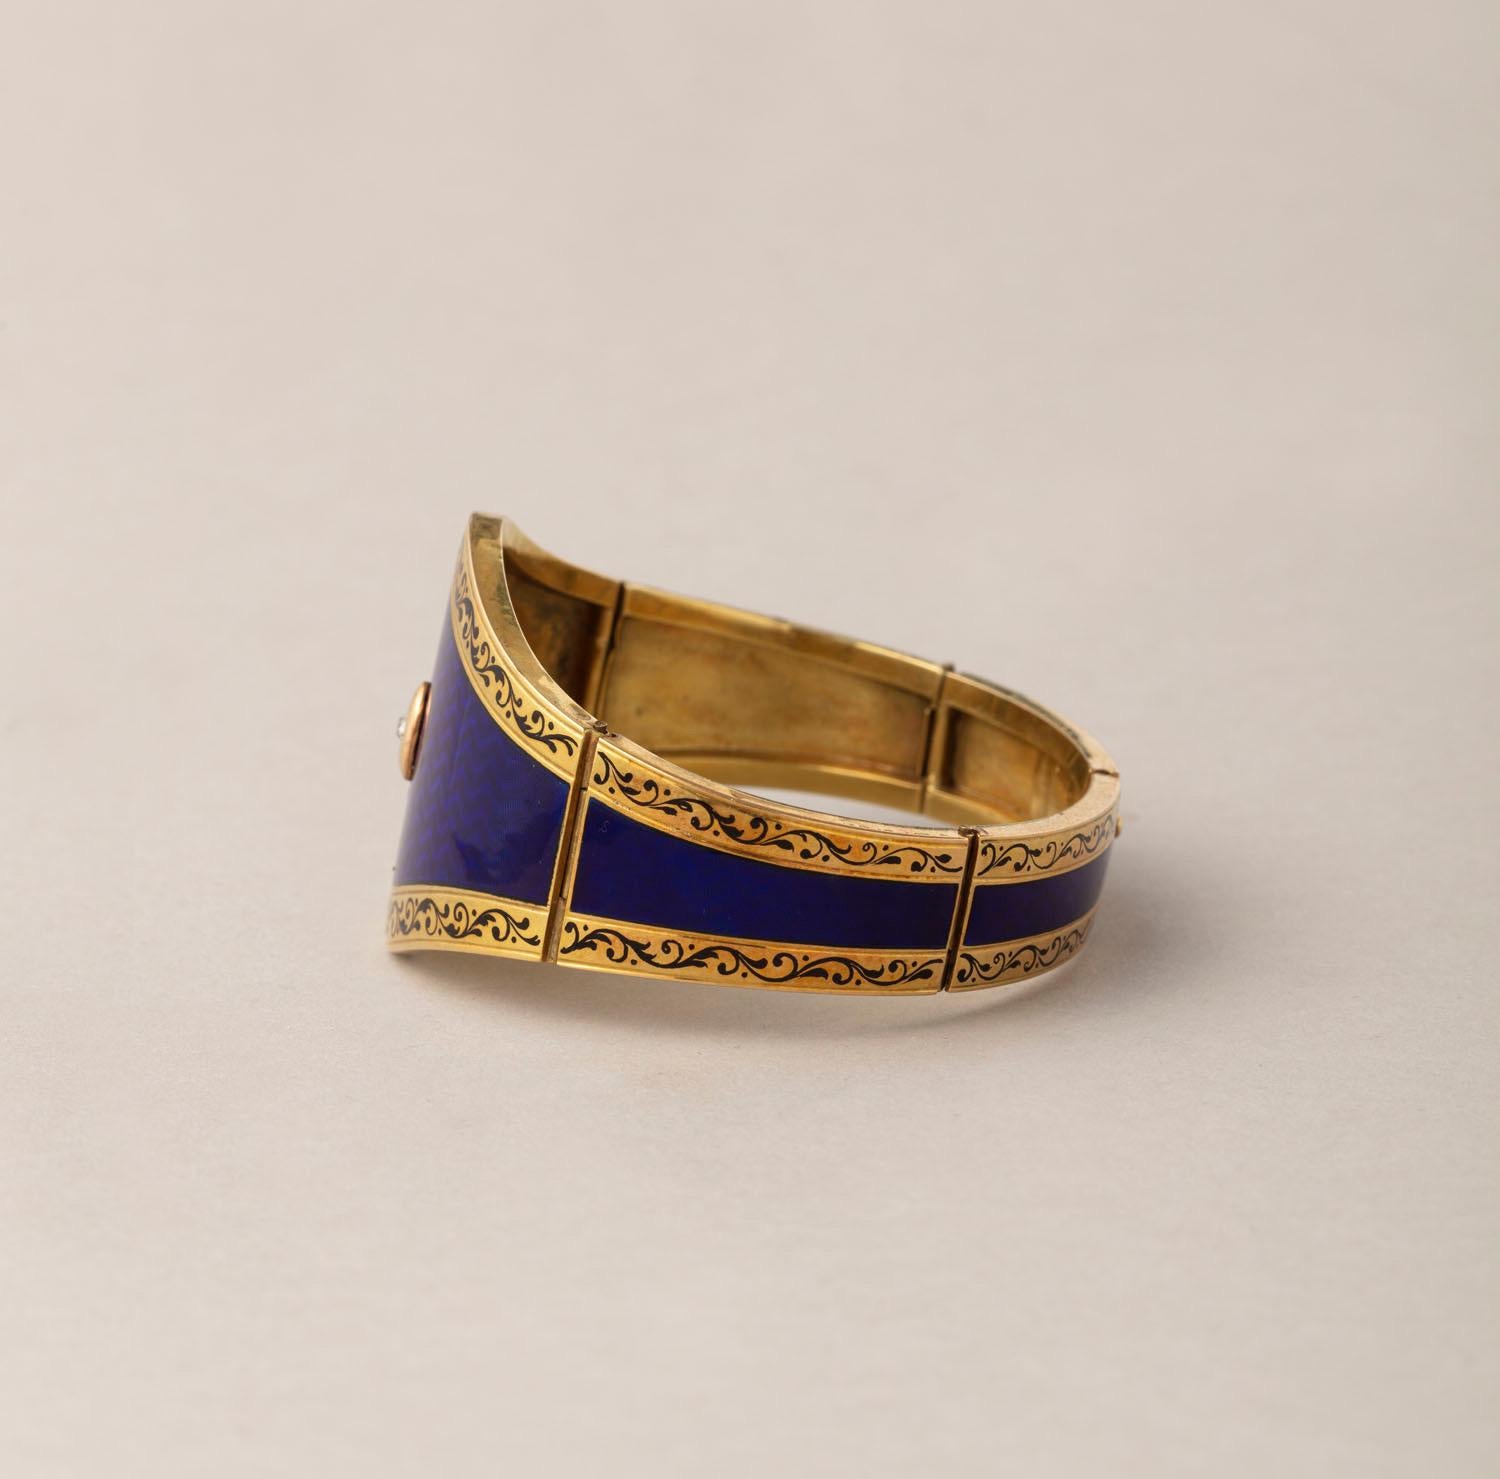 A 14 carat gold bangle decorated all over with perfect night blue translucent enamel over a wave like guilloche, wider at the front with a diamond detail, narrowing at the back, on each side is a border with black enamel scrolls, the bangle opens